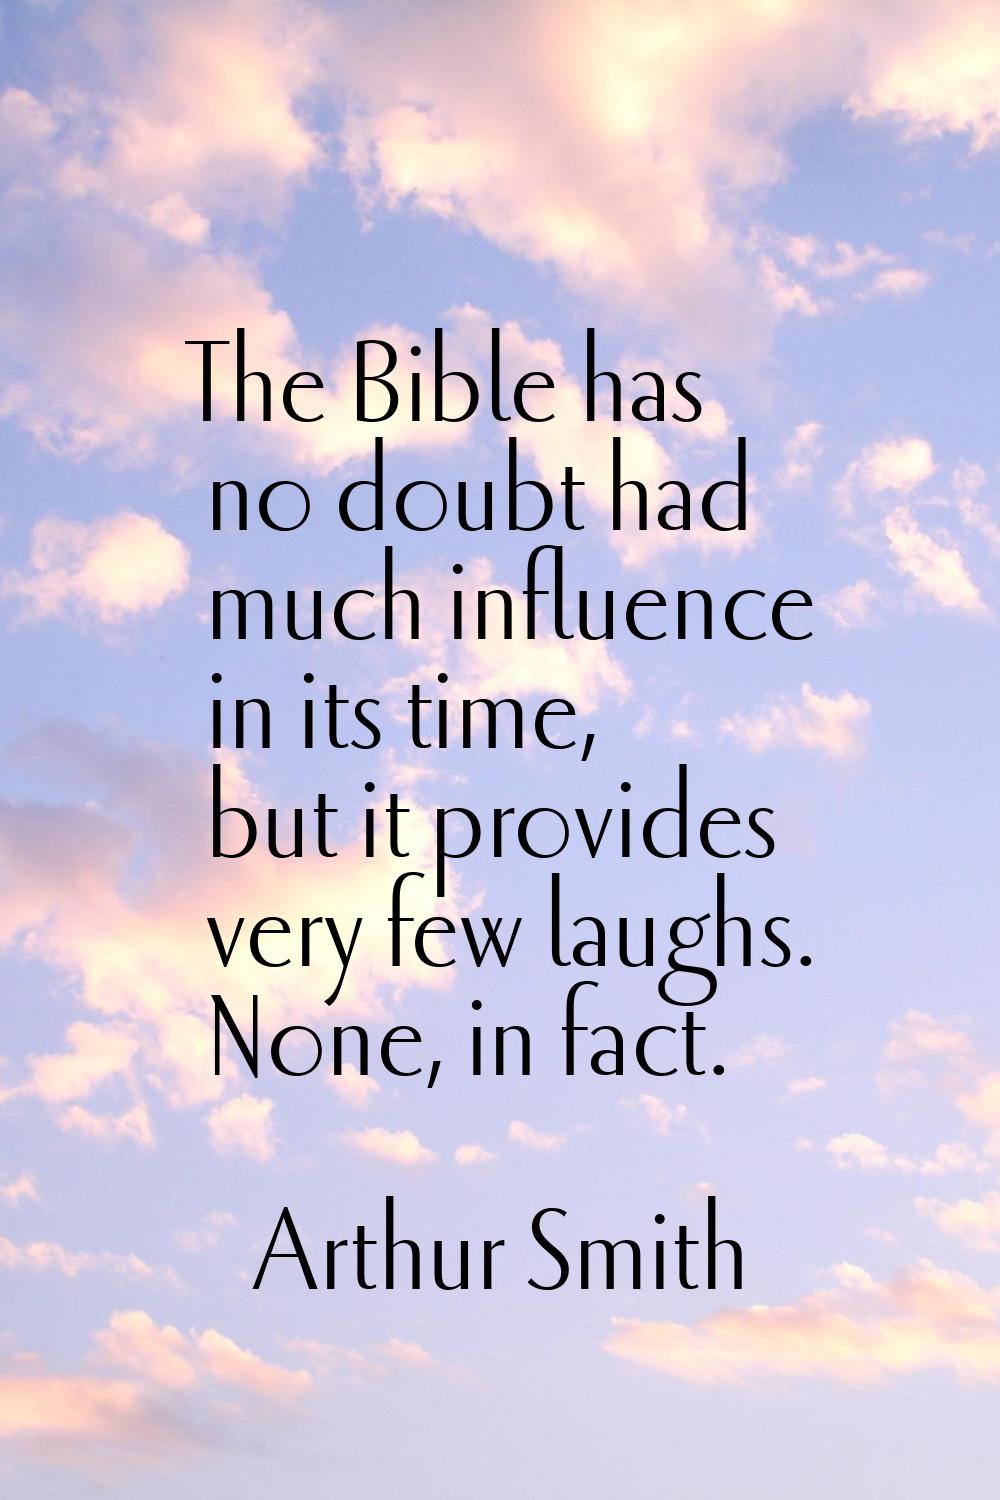 The Bible has no doubt had much influence in its time, but it provides very few laughs. None, in fa